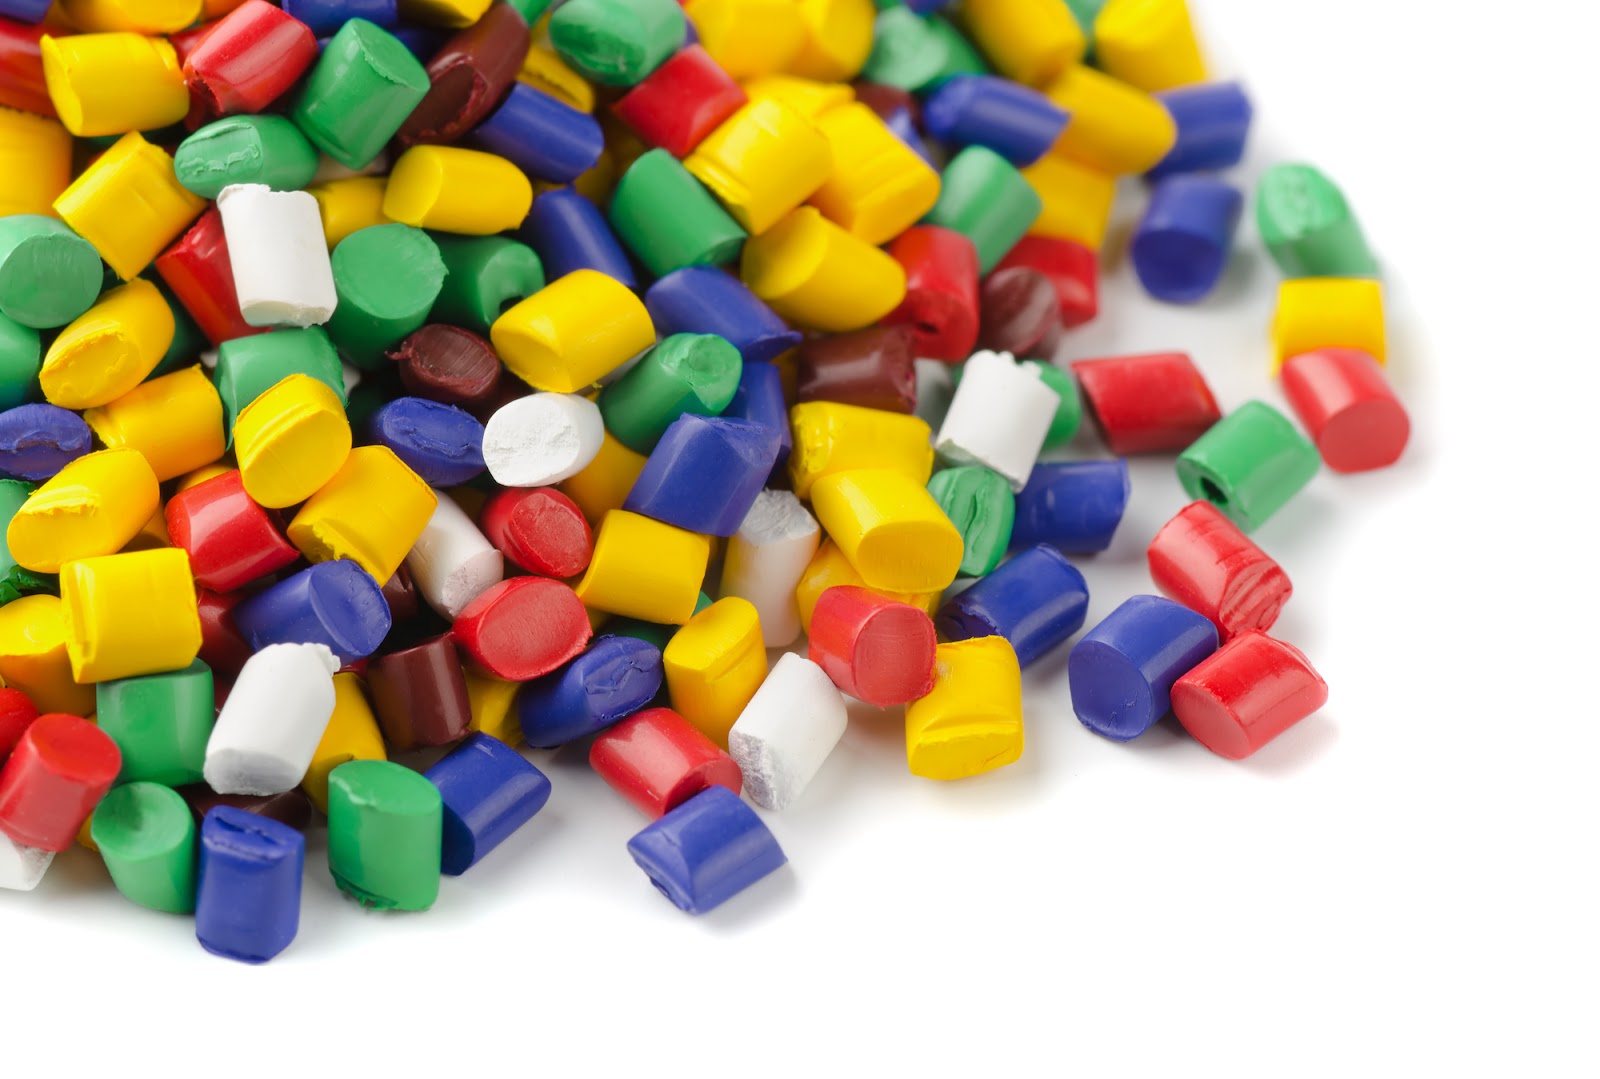 Raw Plastic Pellets For Injection Molding